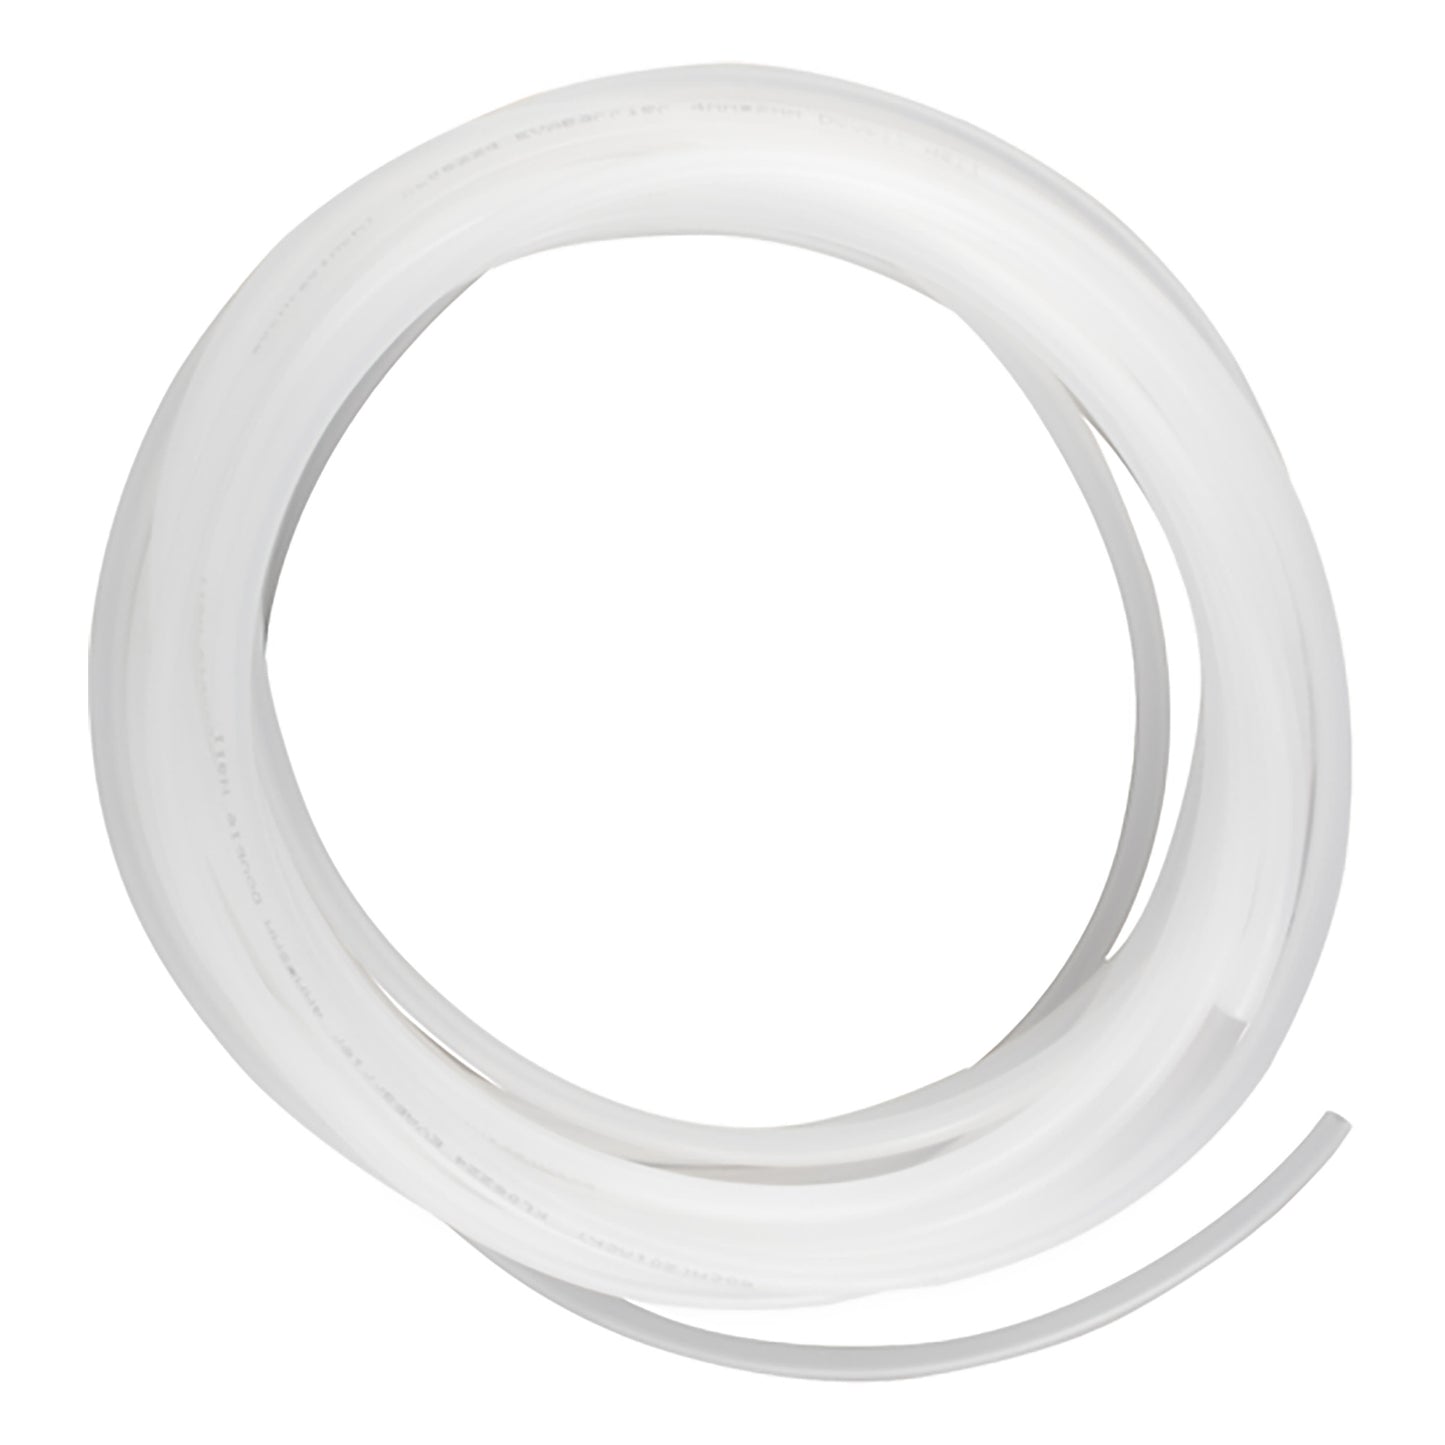 EVABarrier Double Wall Gas Tubing for Duotight - 5/32 in ID x 5/16 in OD (4x8mm) 39 ft BULK